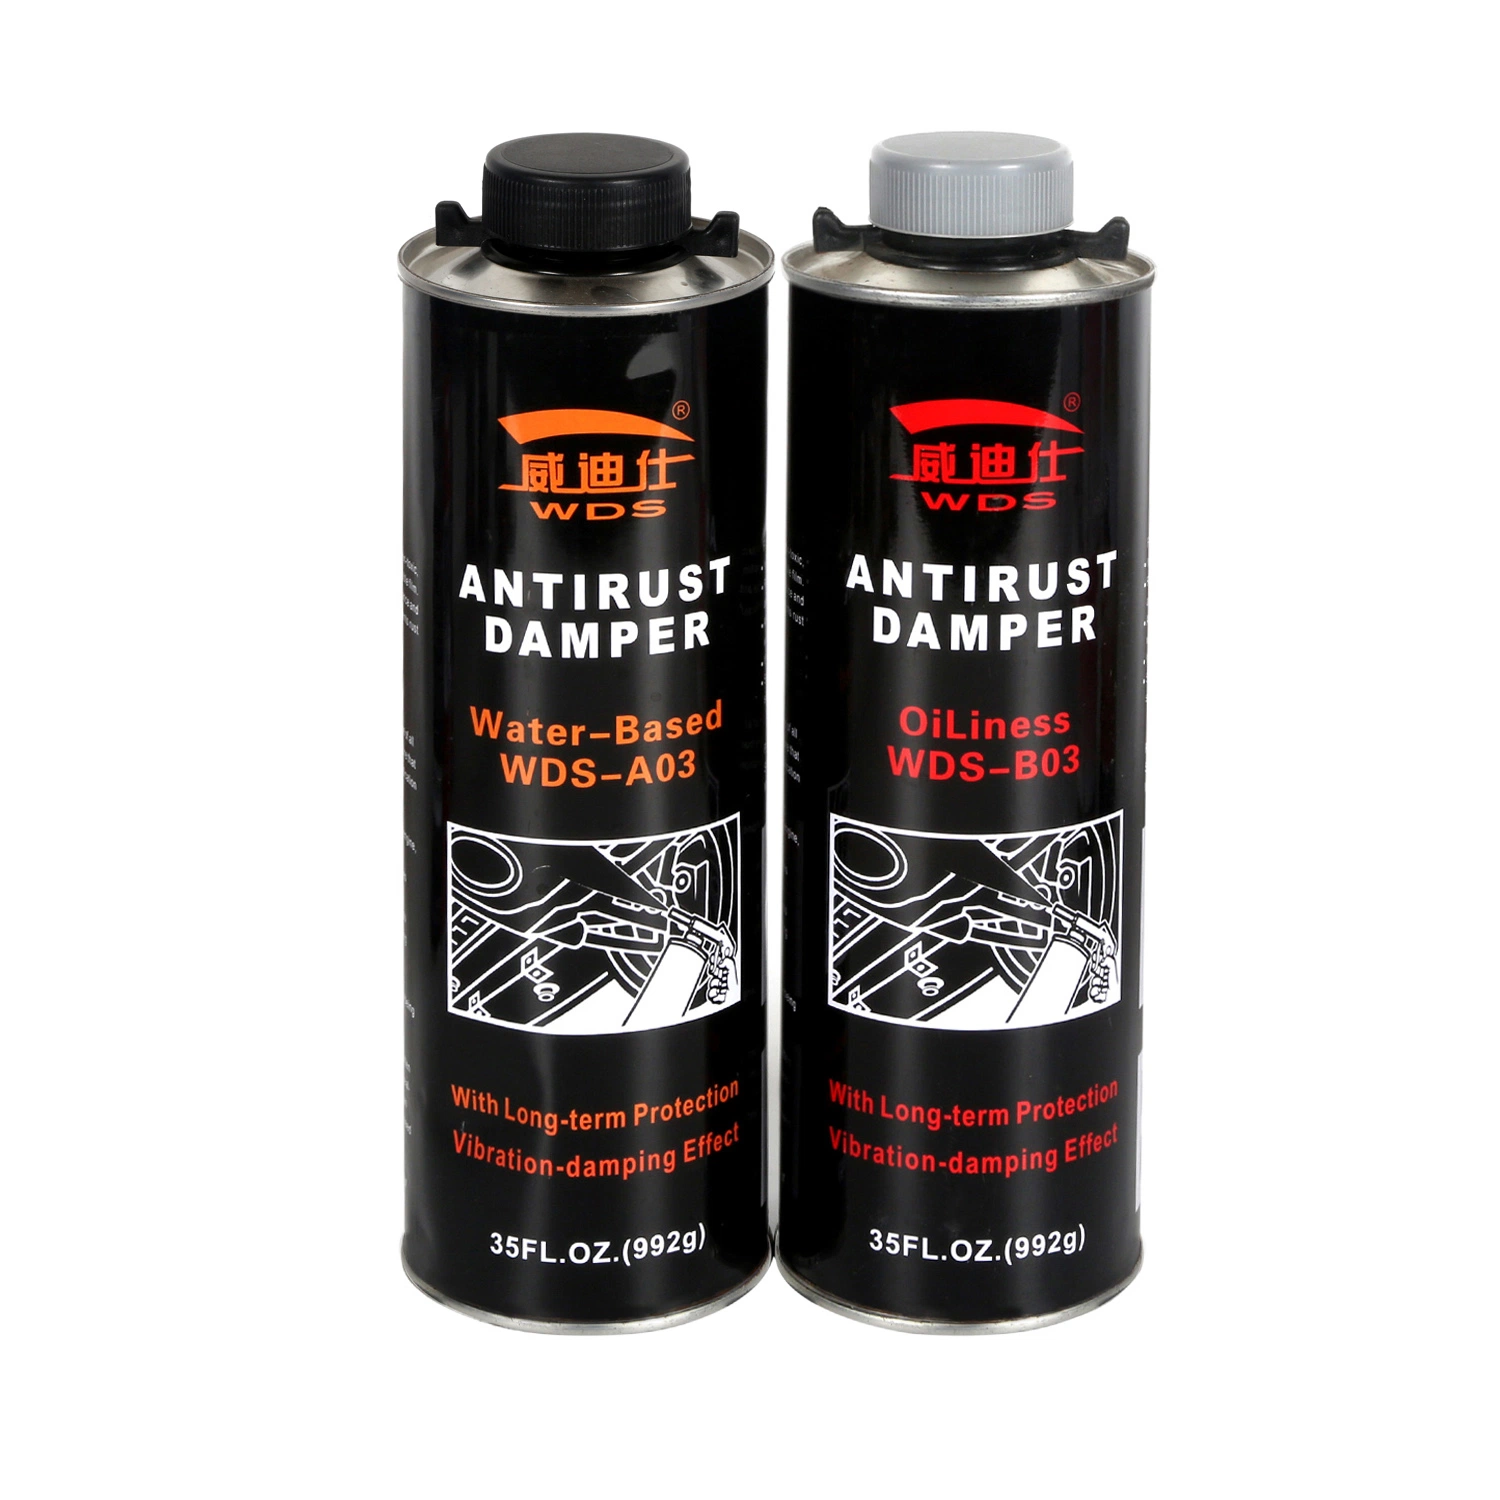 Water-Based Spray Paint for Automotive with Anti Rust Corrosion